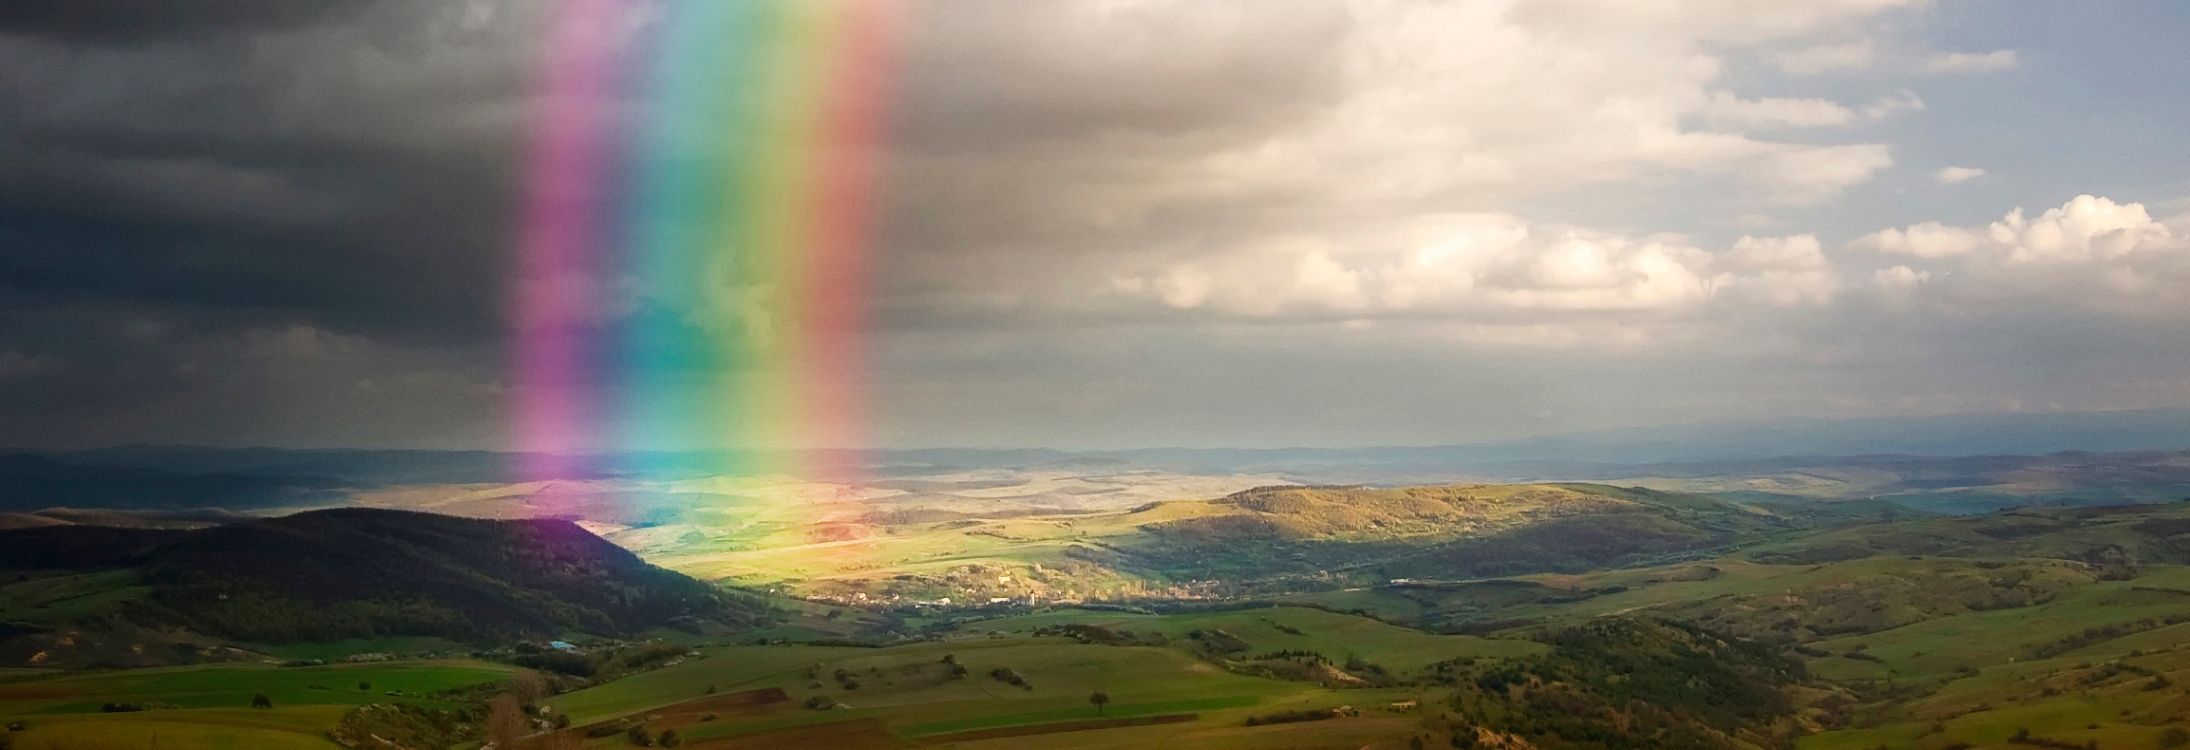 Places where the Rainbow is most beautiful